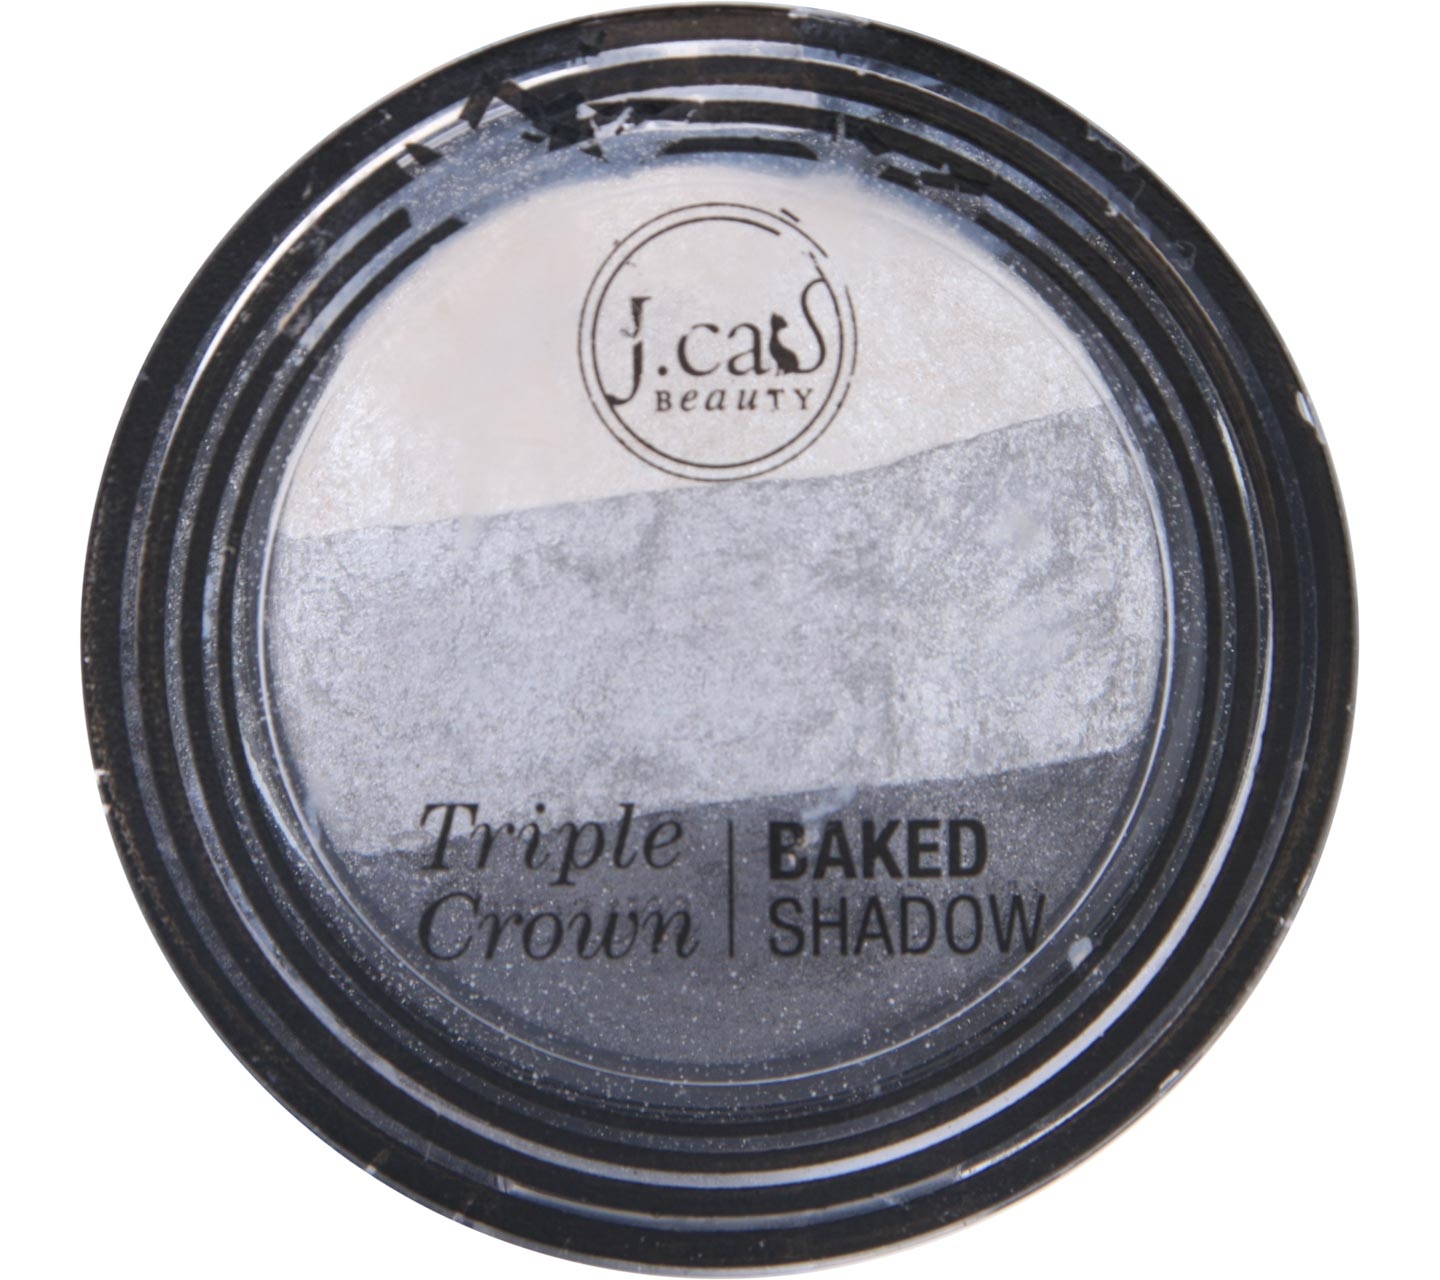 J.cat beauty Crushed Oreo Triple Crown Baked Shadow Faces